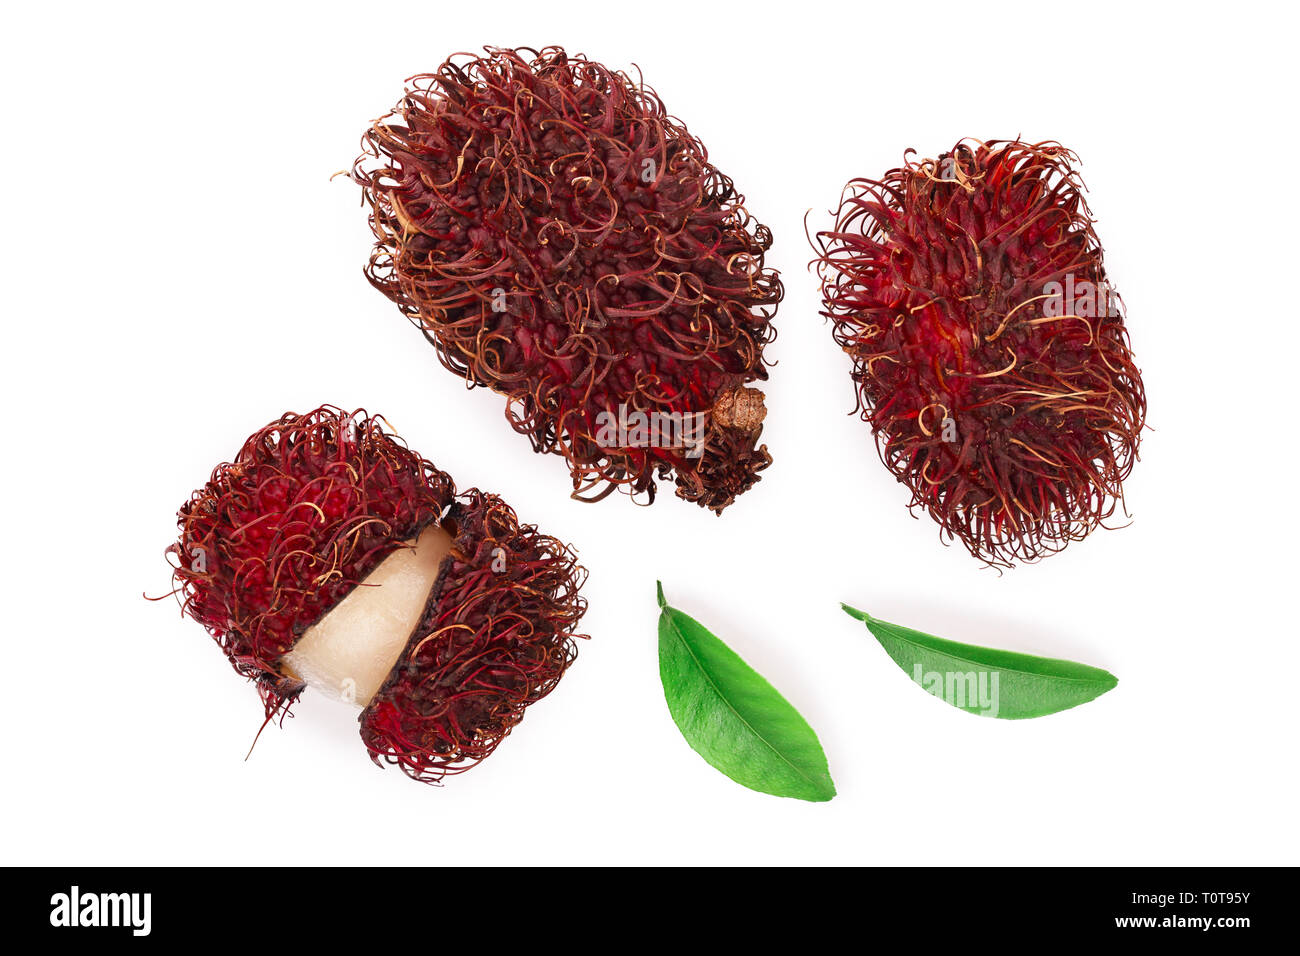 rambutan with leaves isolated on white background. Tropical fruit. Nephelium lappaceum. Top view. Flat lay. Stock Photo